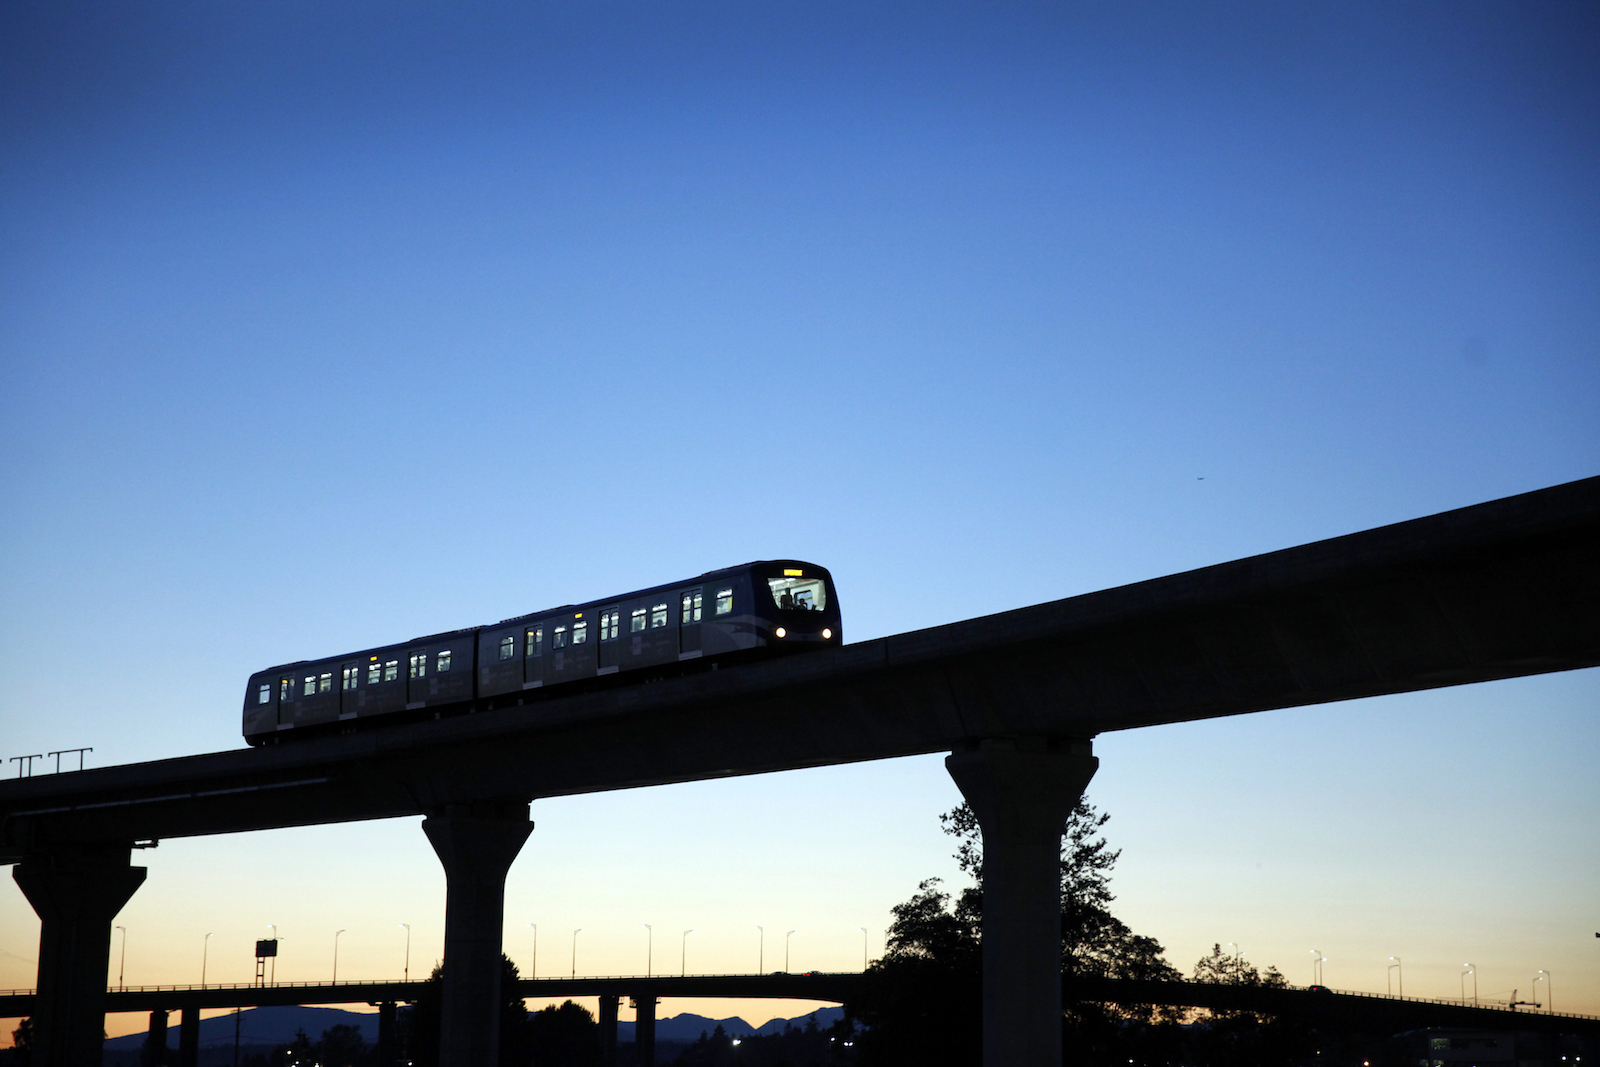 A lightrail train on an elevated road silhouetted against a darkened sky